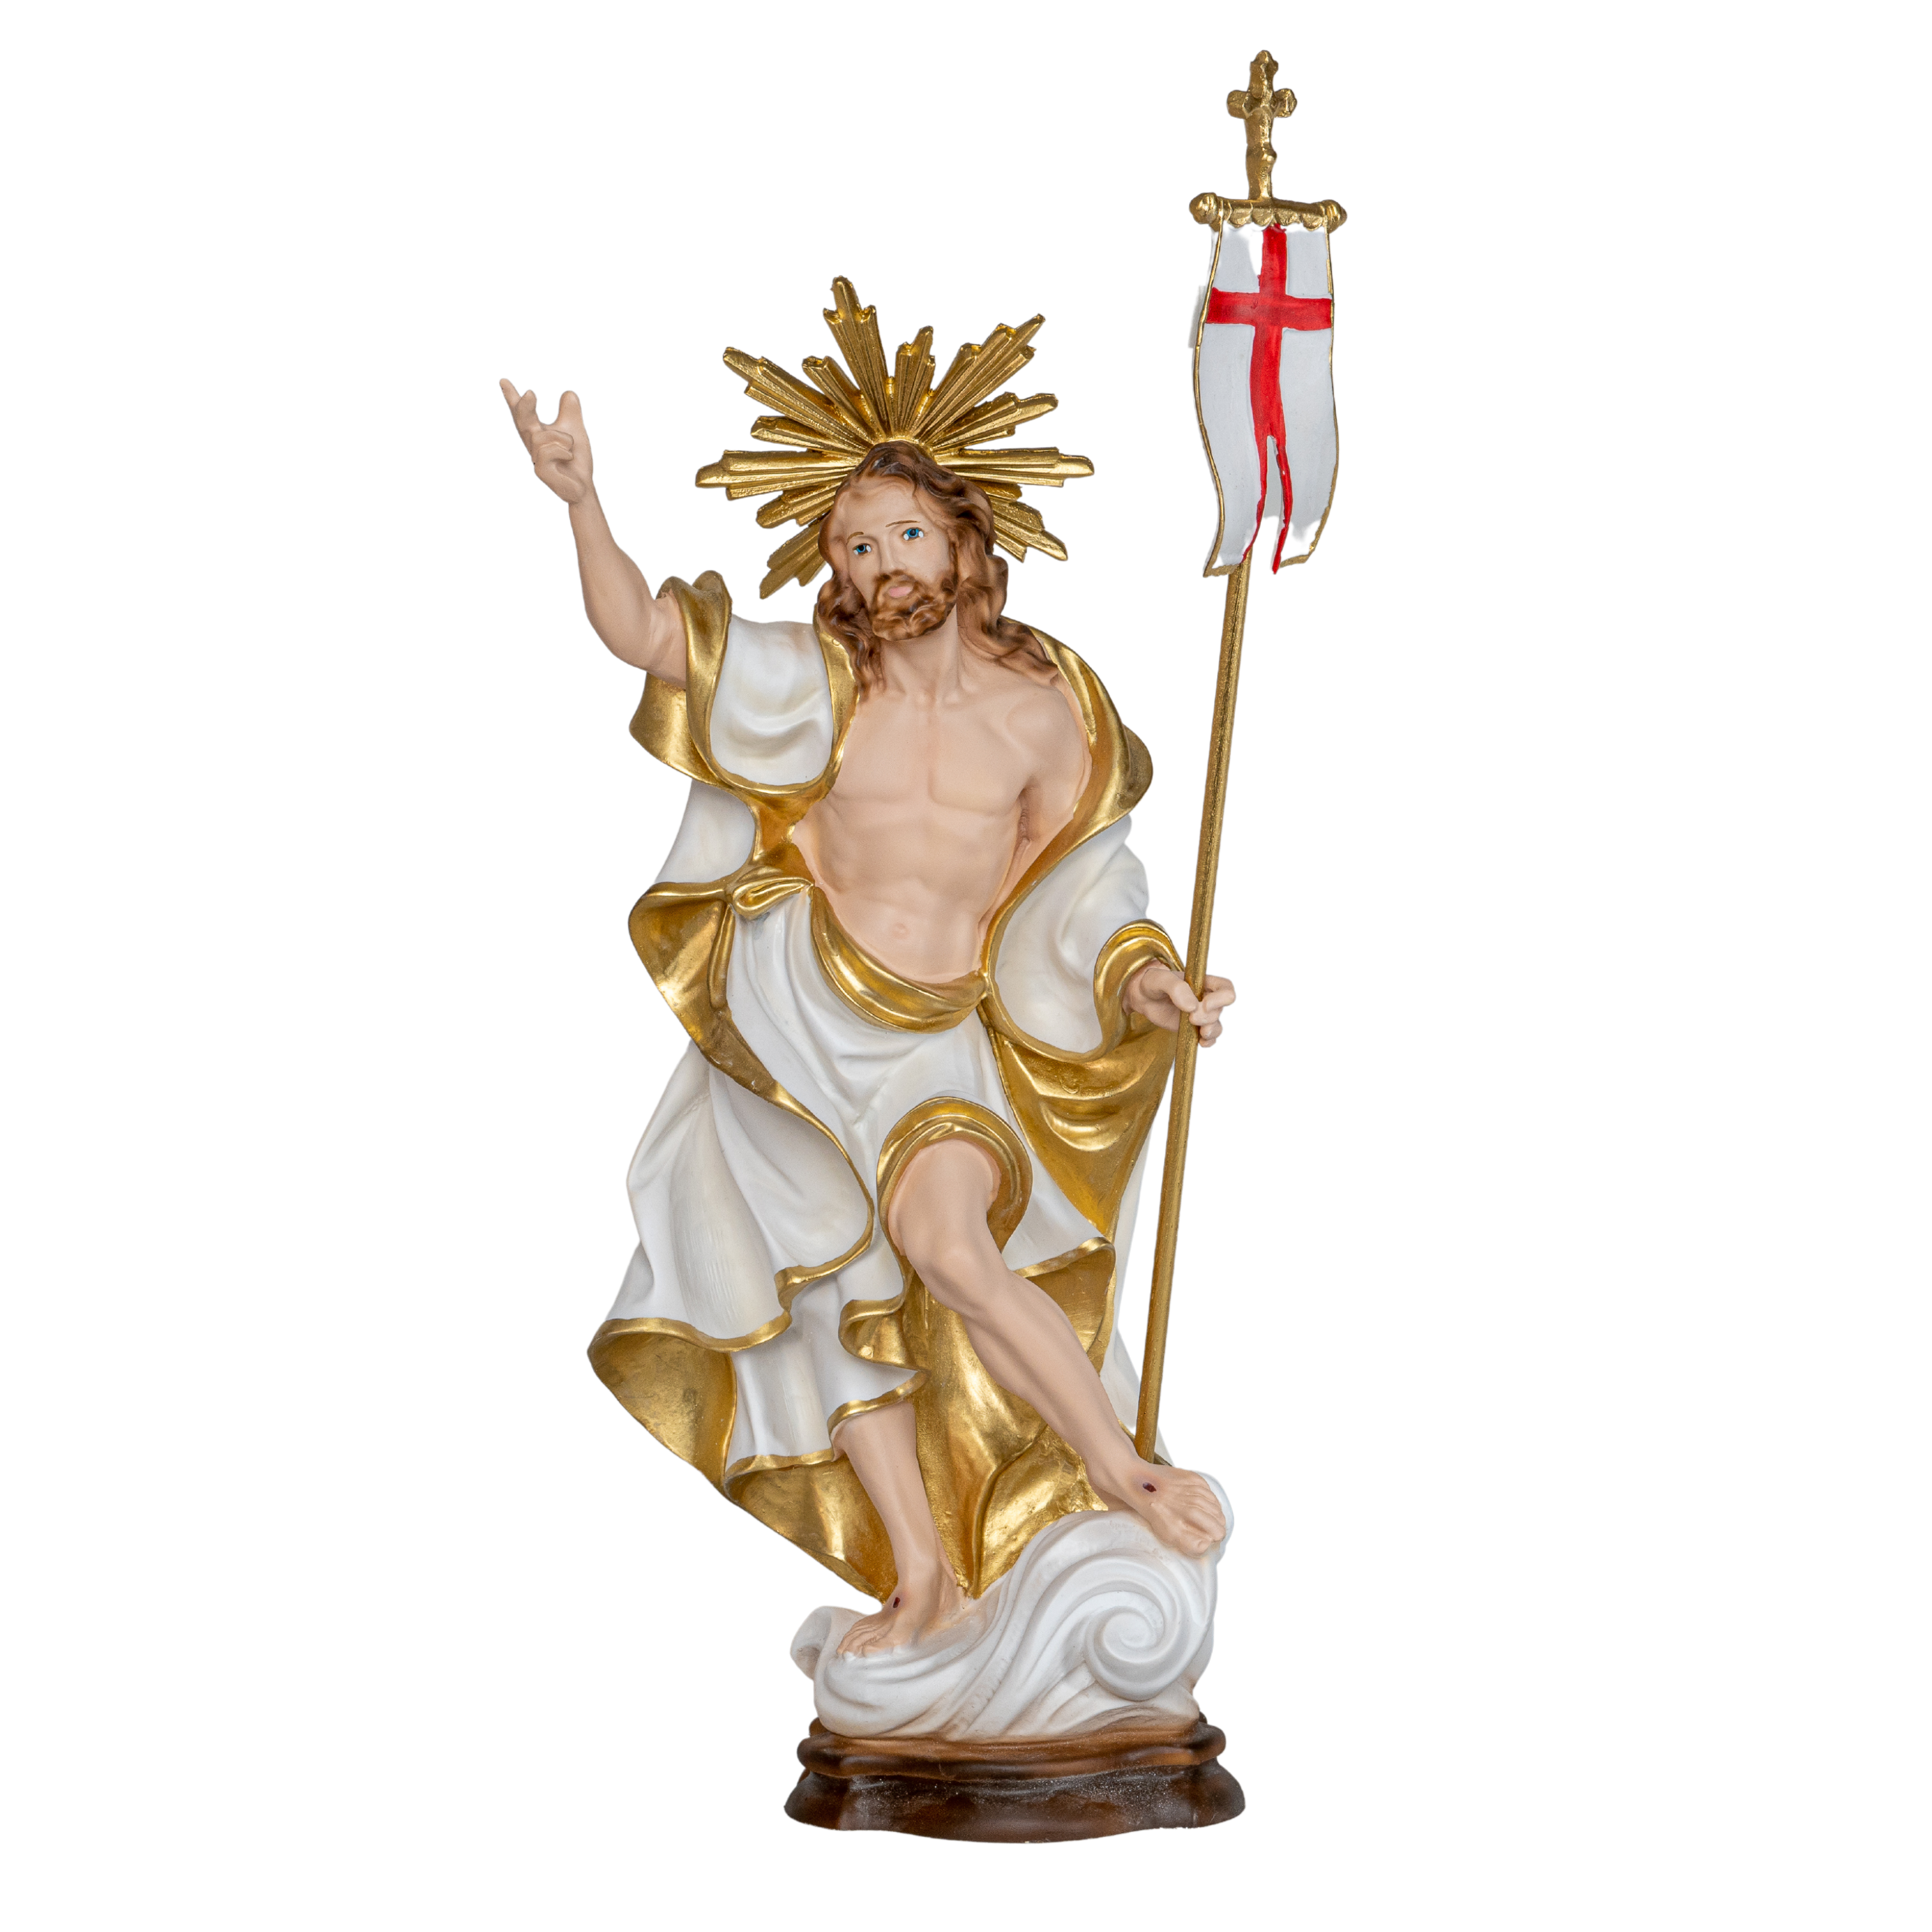 The Faith Gift Shop Risen Christ estatue - Hand Painted in Italy - Our Tuscany Collection -/Cristo Resucitado